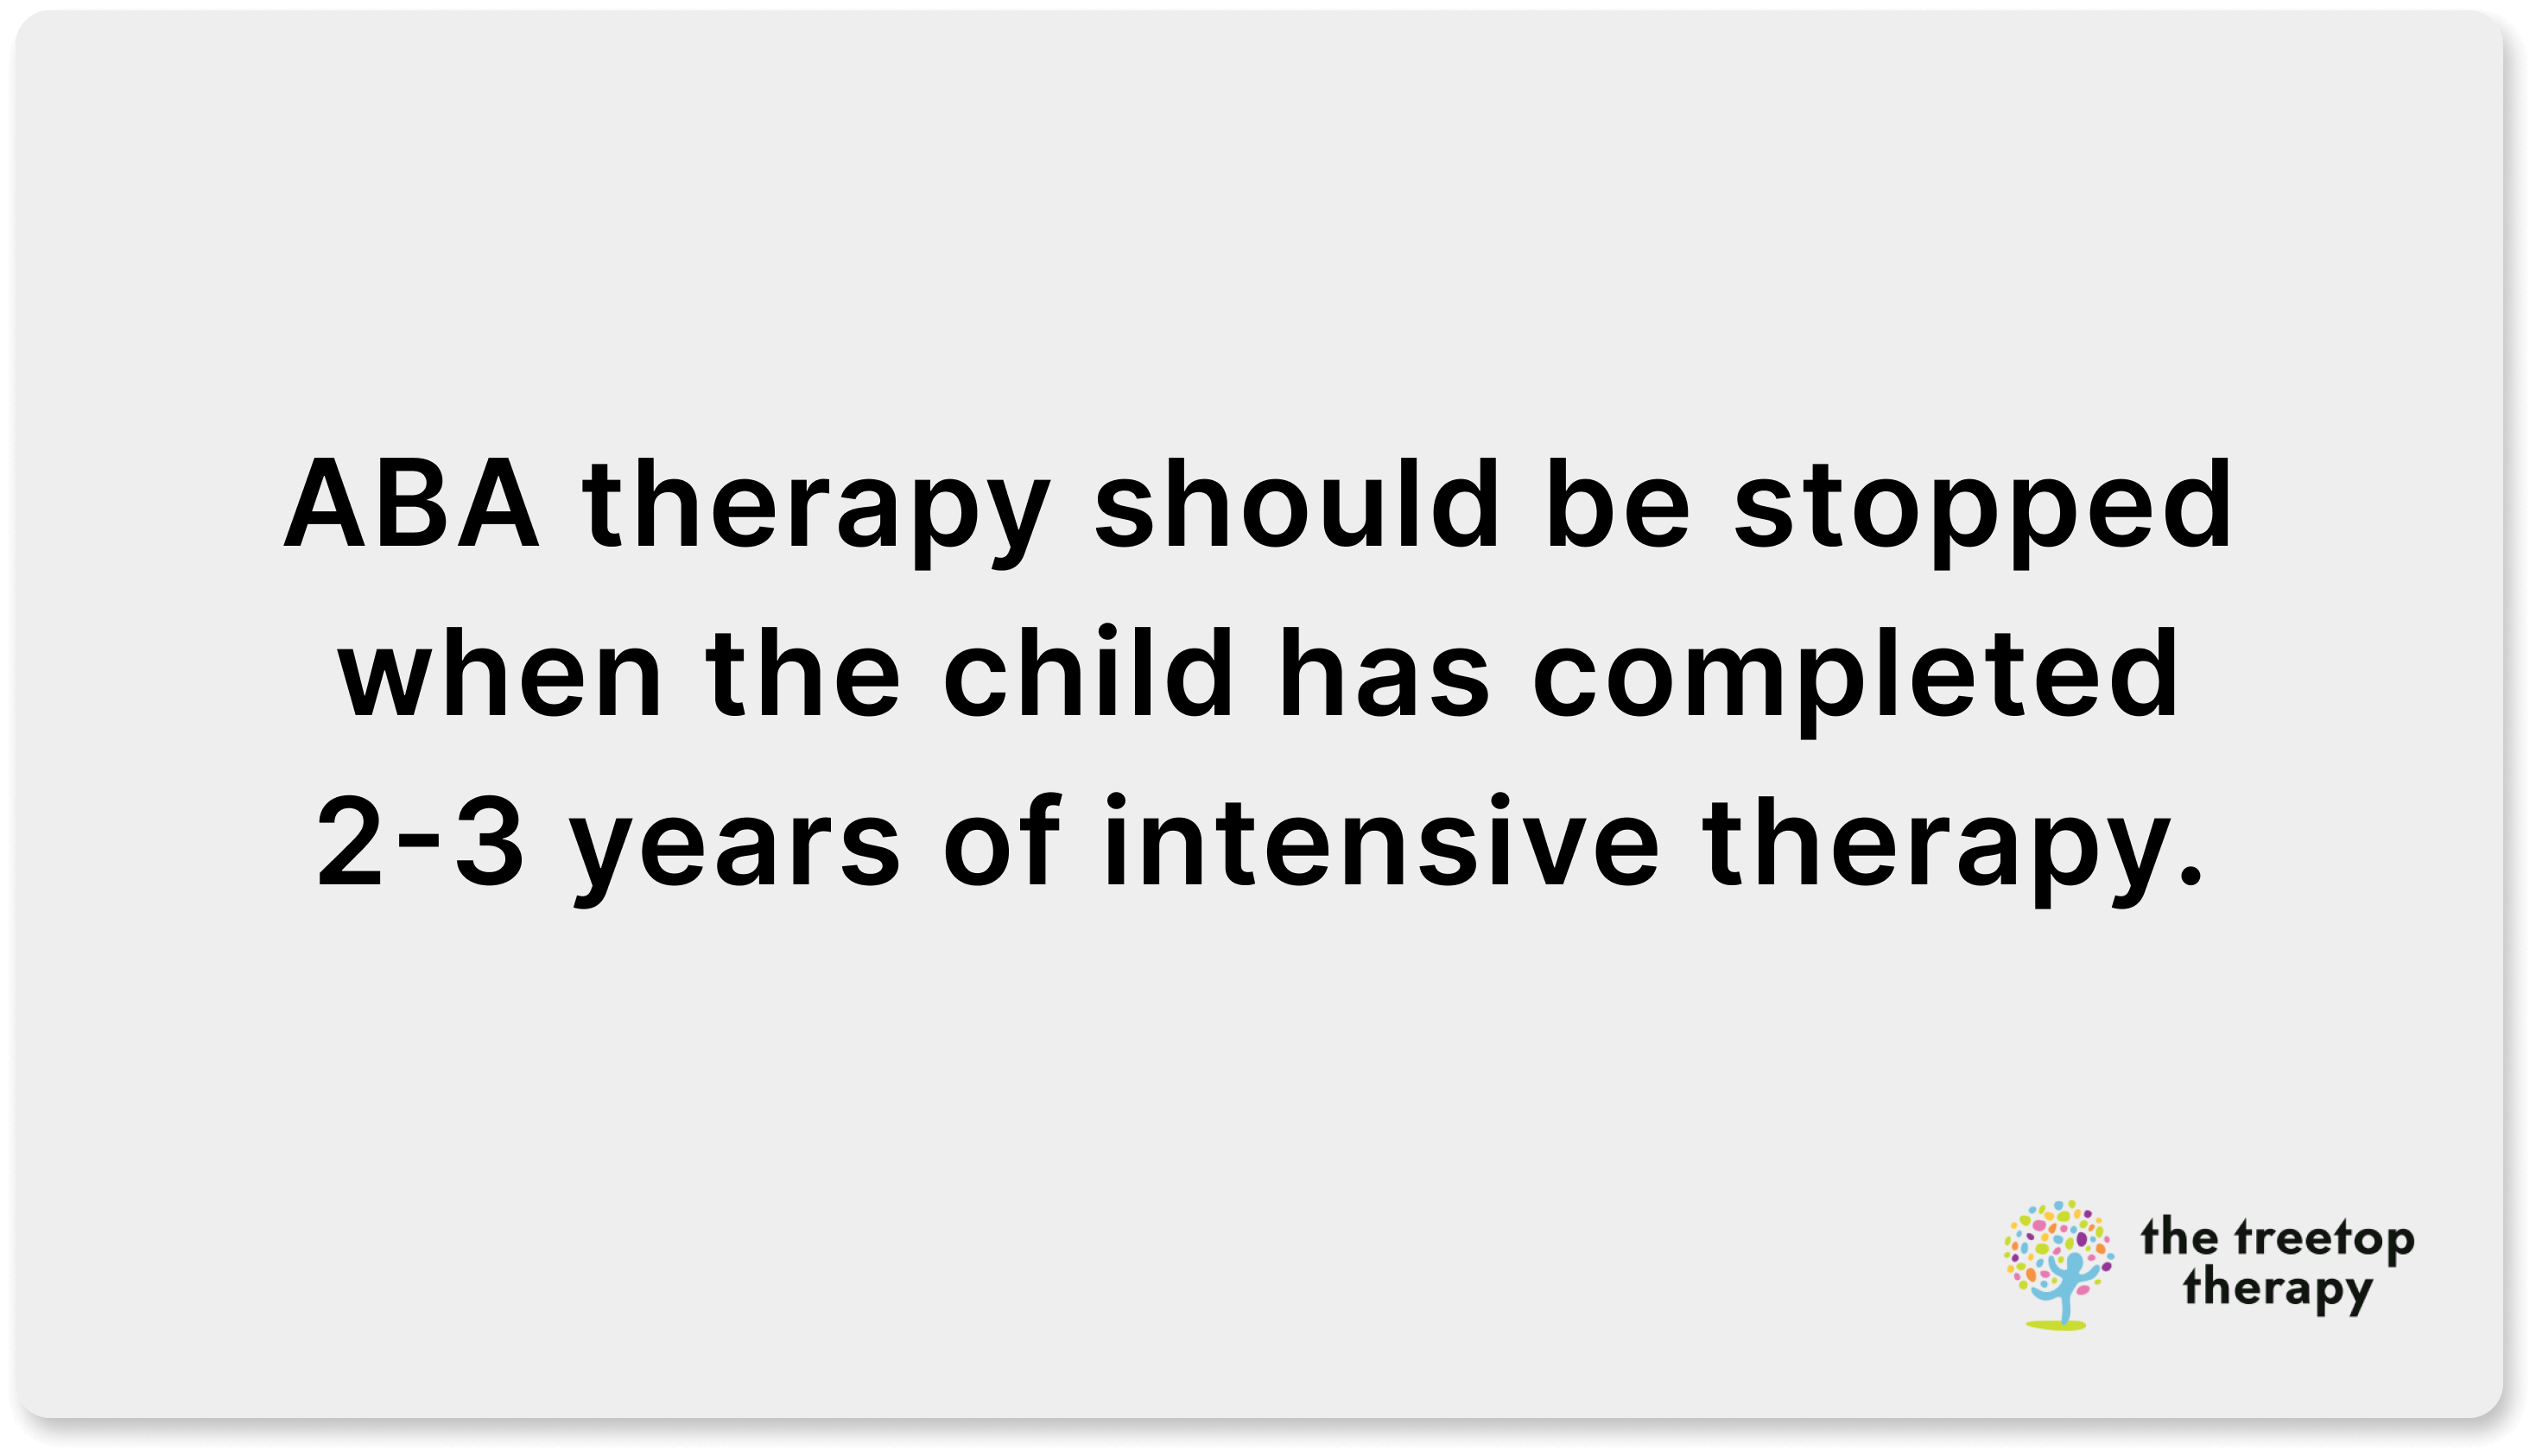 aba therapy should be stopped after 2-3 years of intensive therapy